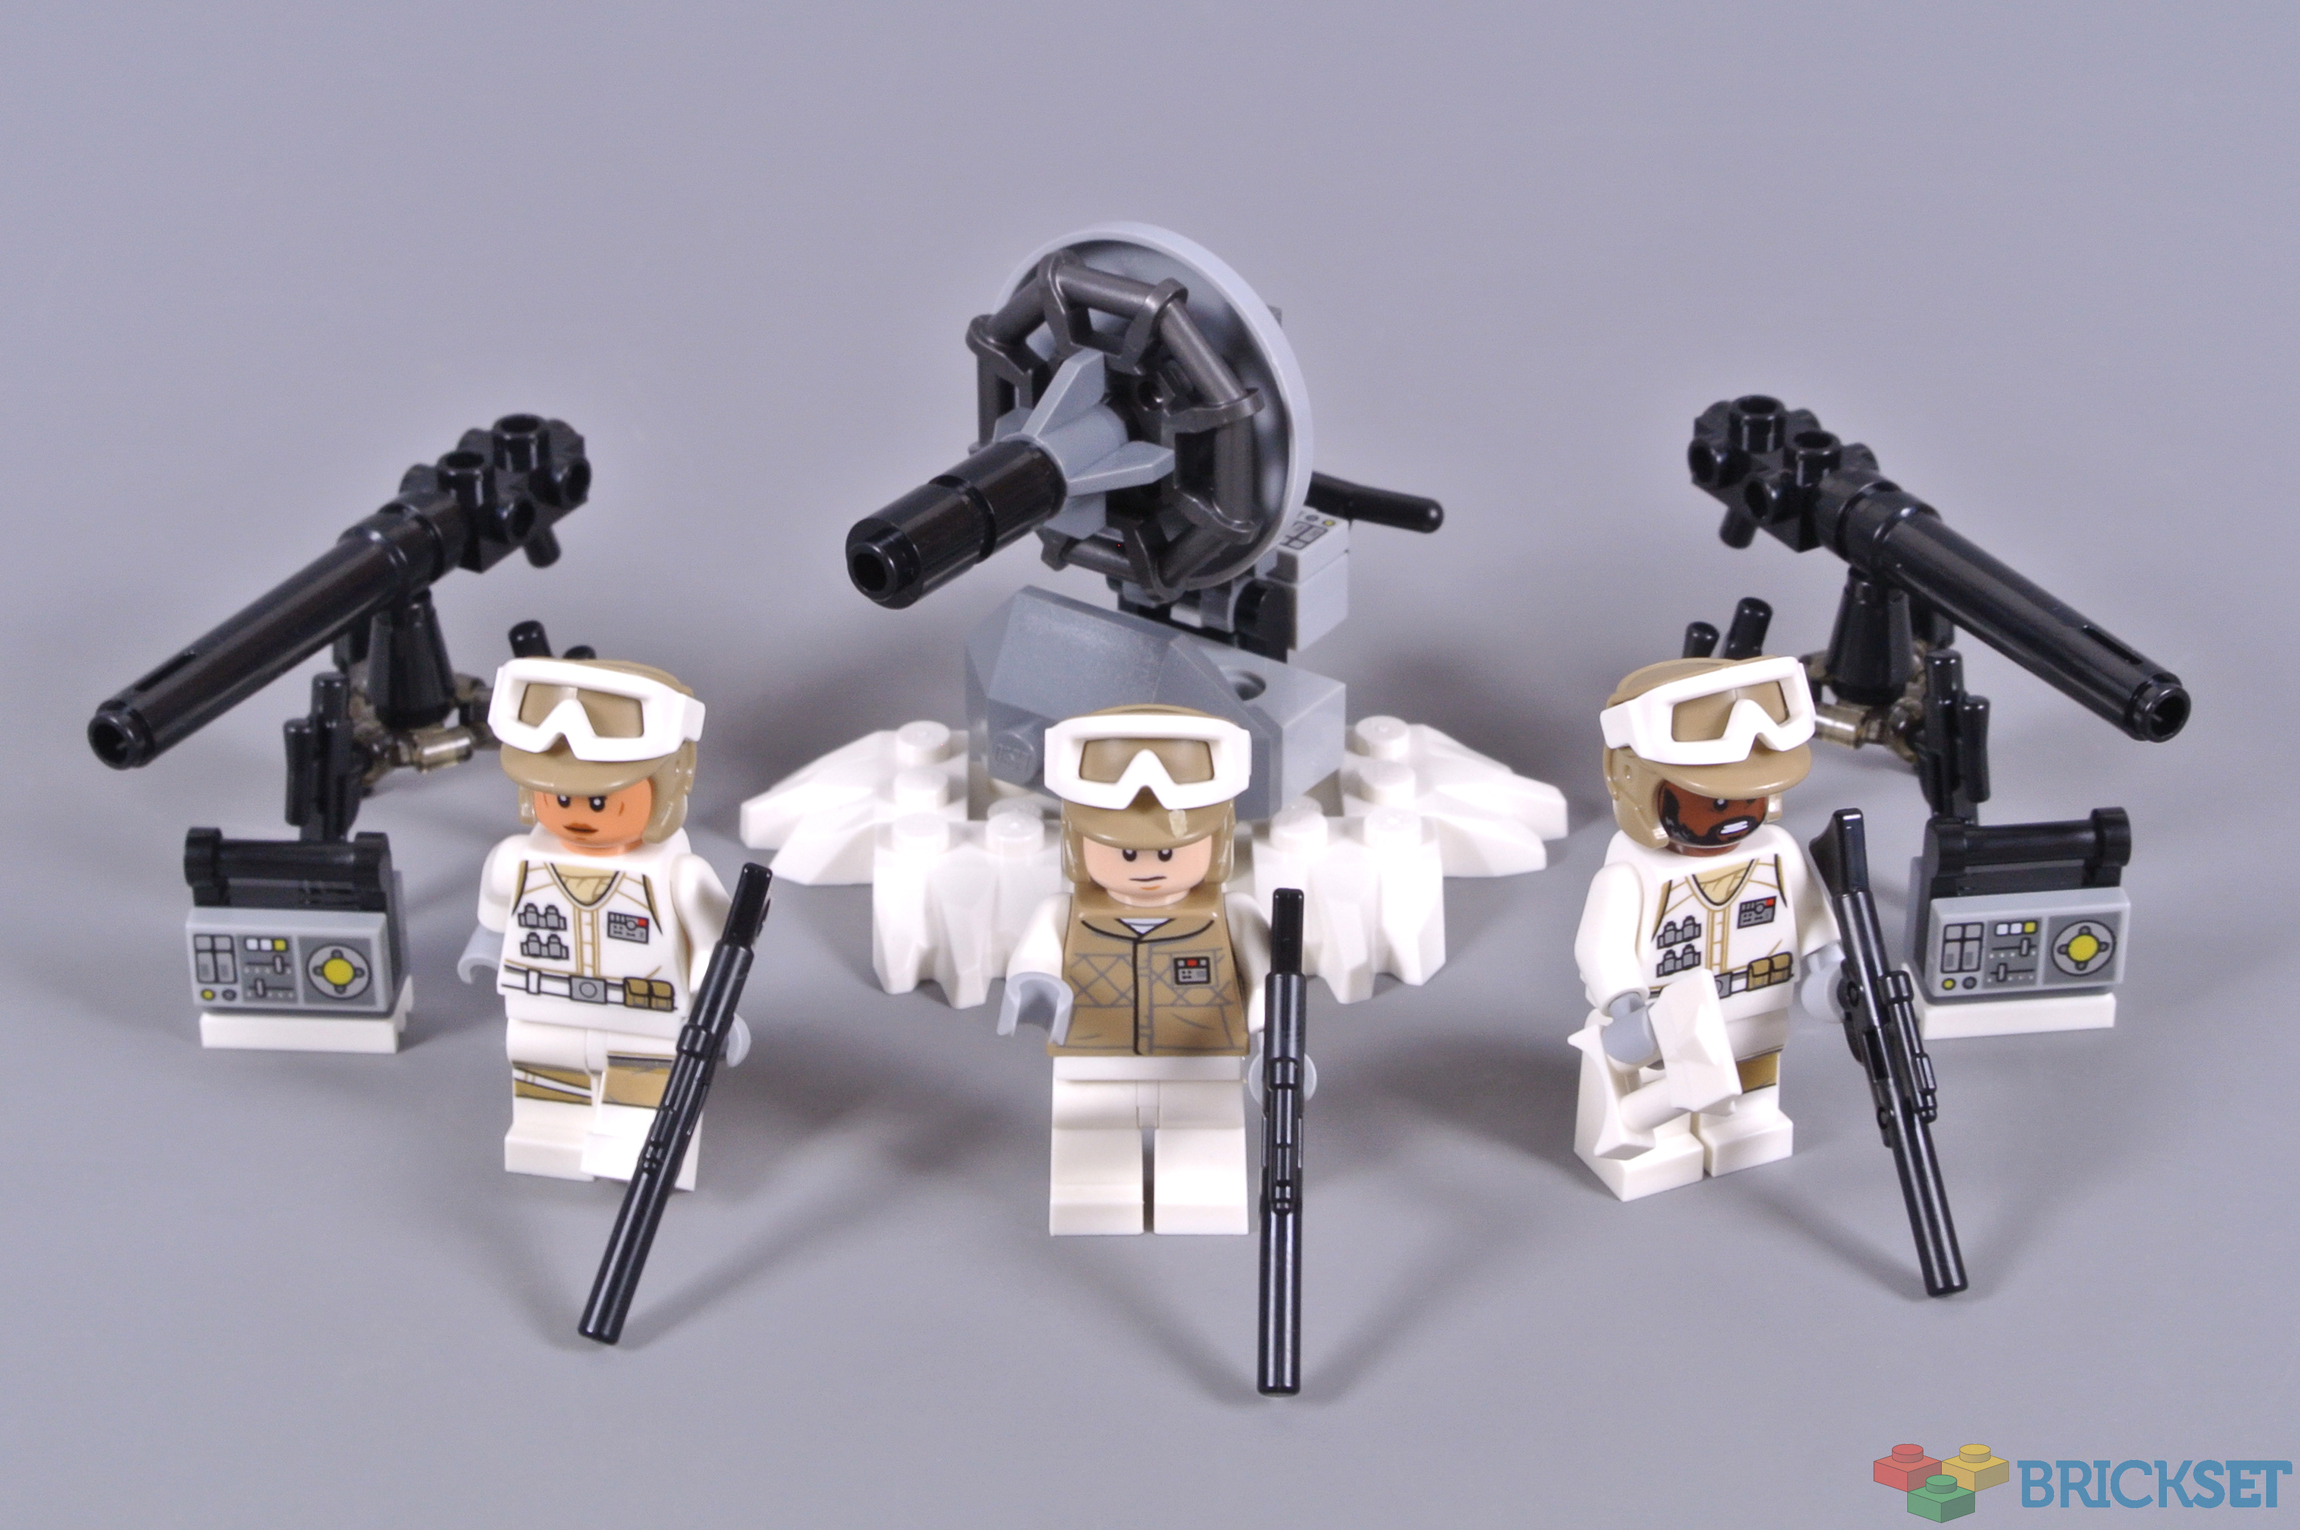 LEGO Minifigure NOT Included Bdc2384 Custom Modern Weapons Multi-pack for Minifigures Metallic Gray